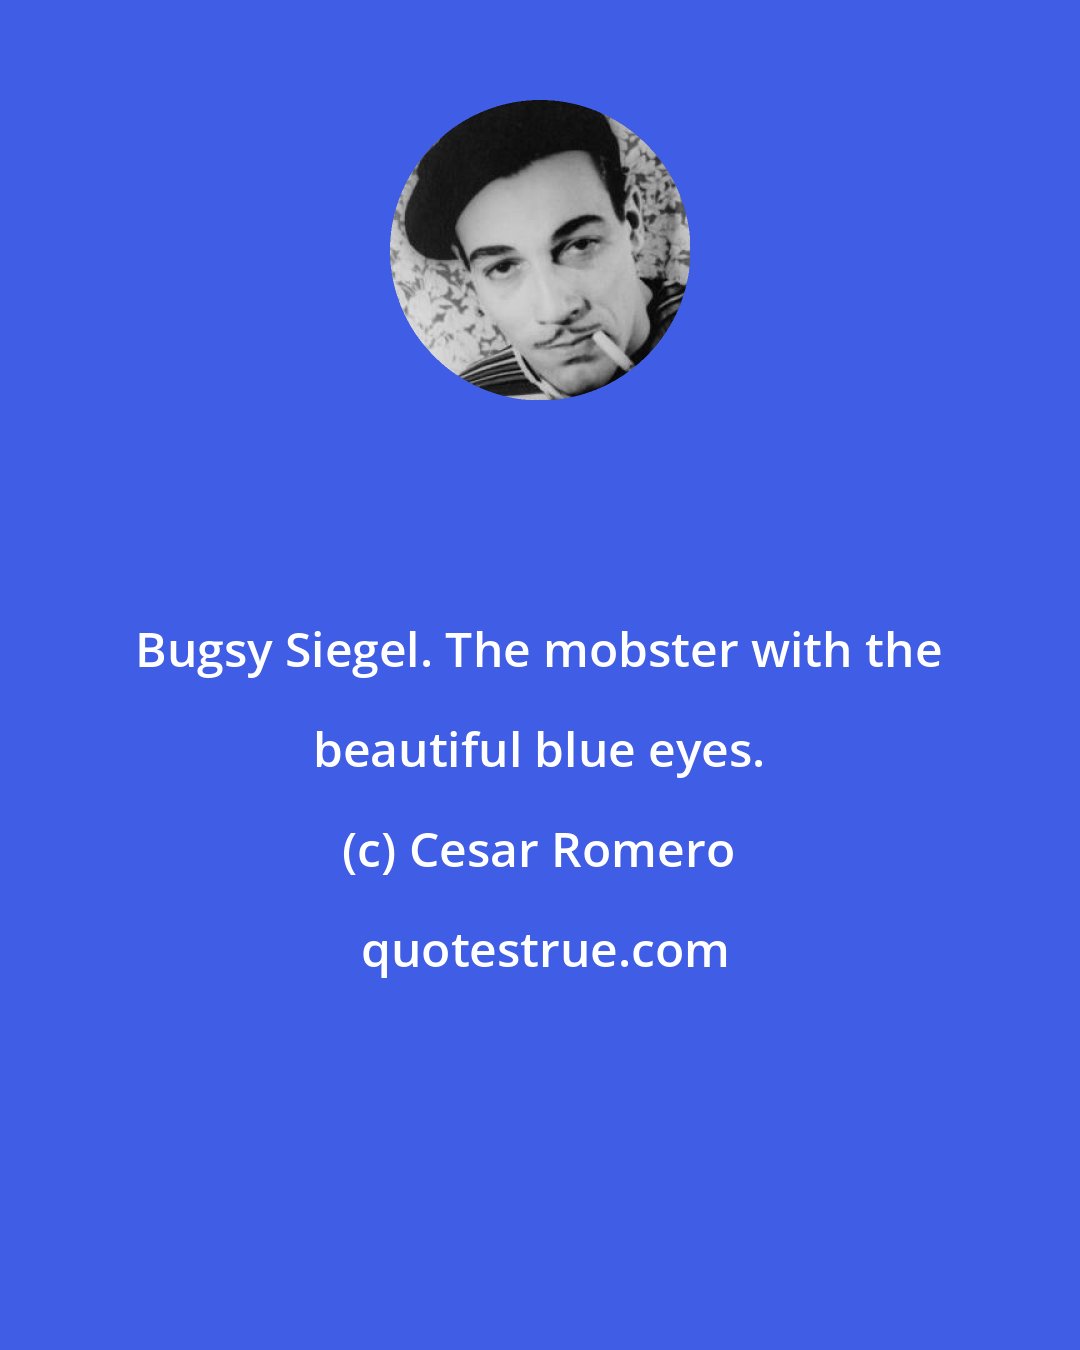 Cesar Romero: Bugsy Siegel. The mobster with the beautiful blue eyes.